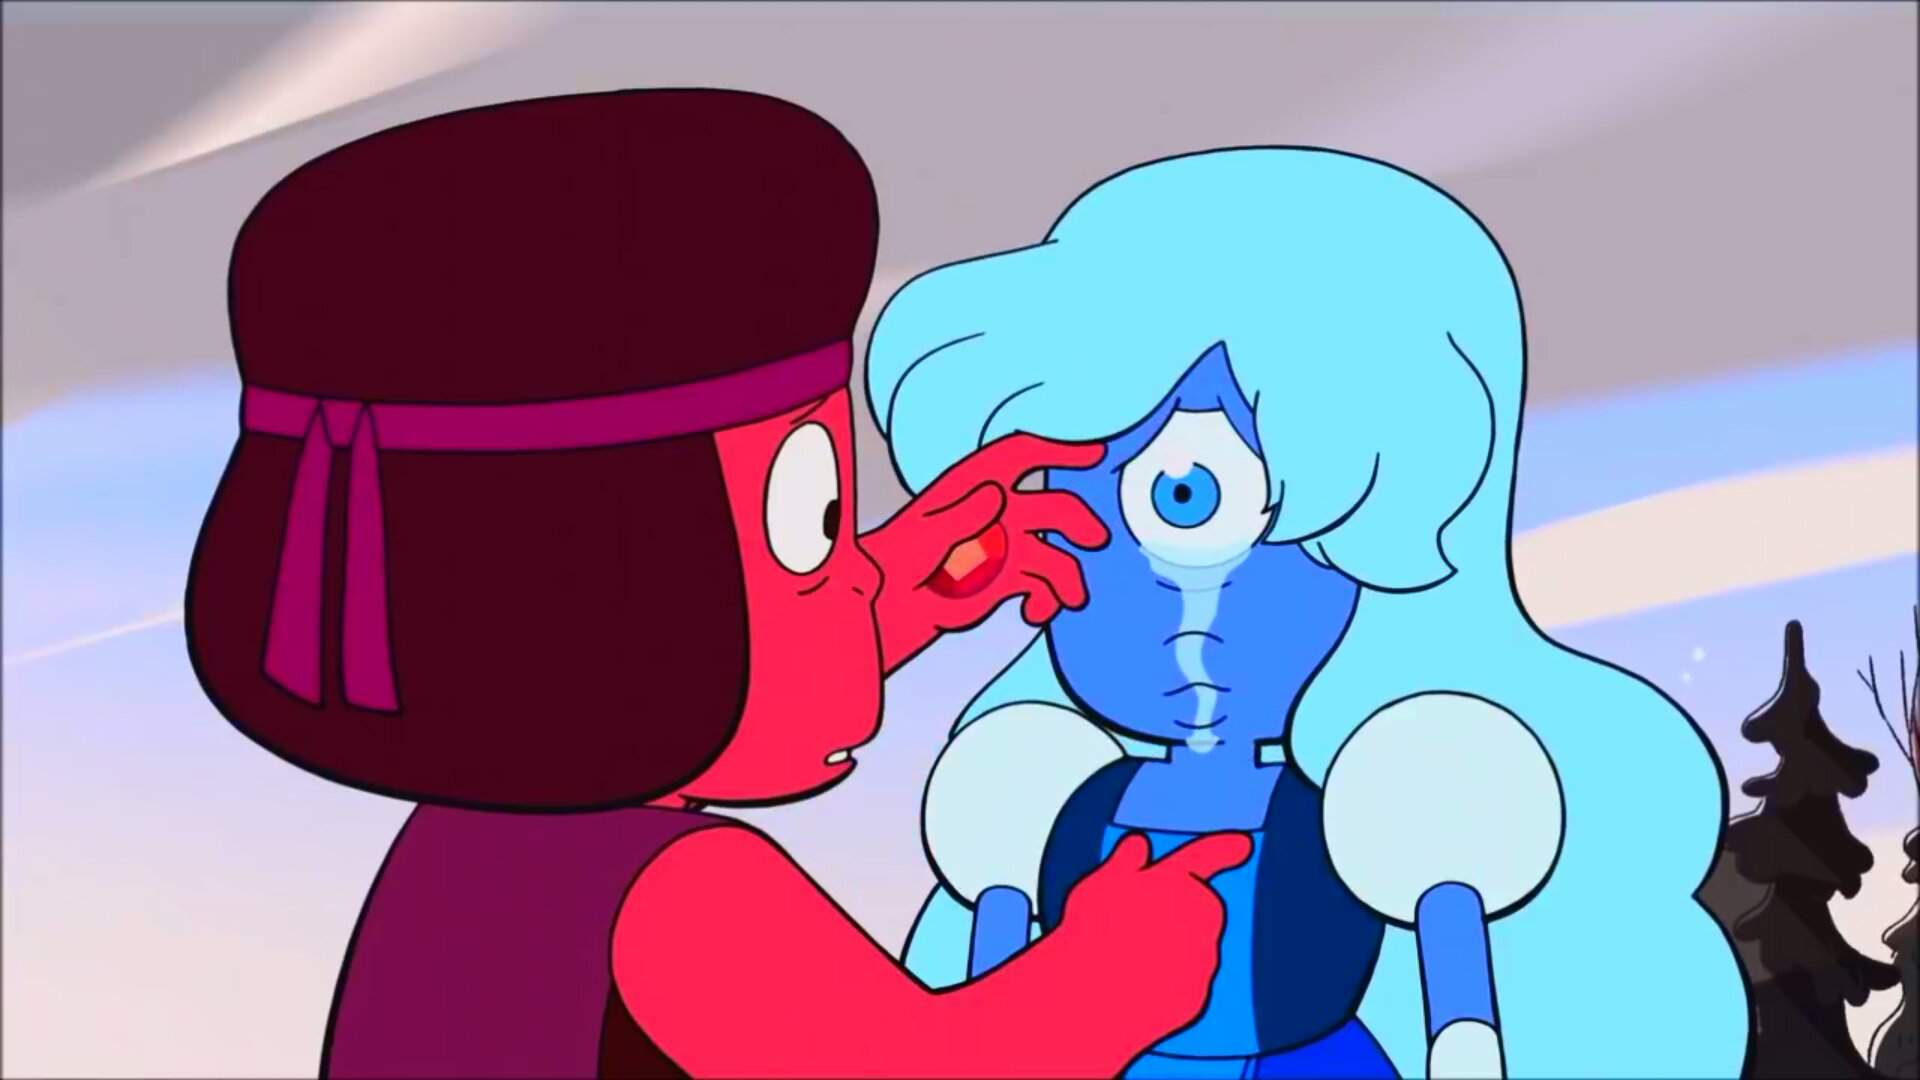 The reason Ruby and Sapphire are getting married Steven Universe Amino.